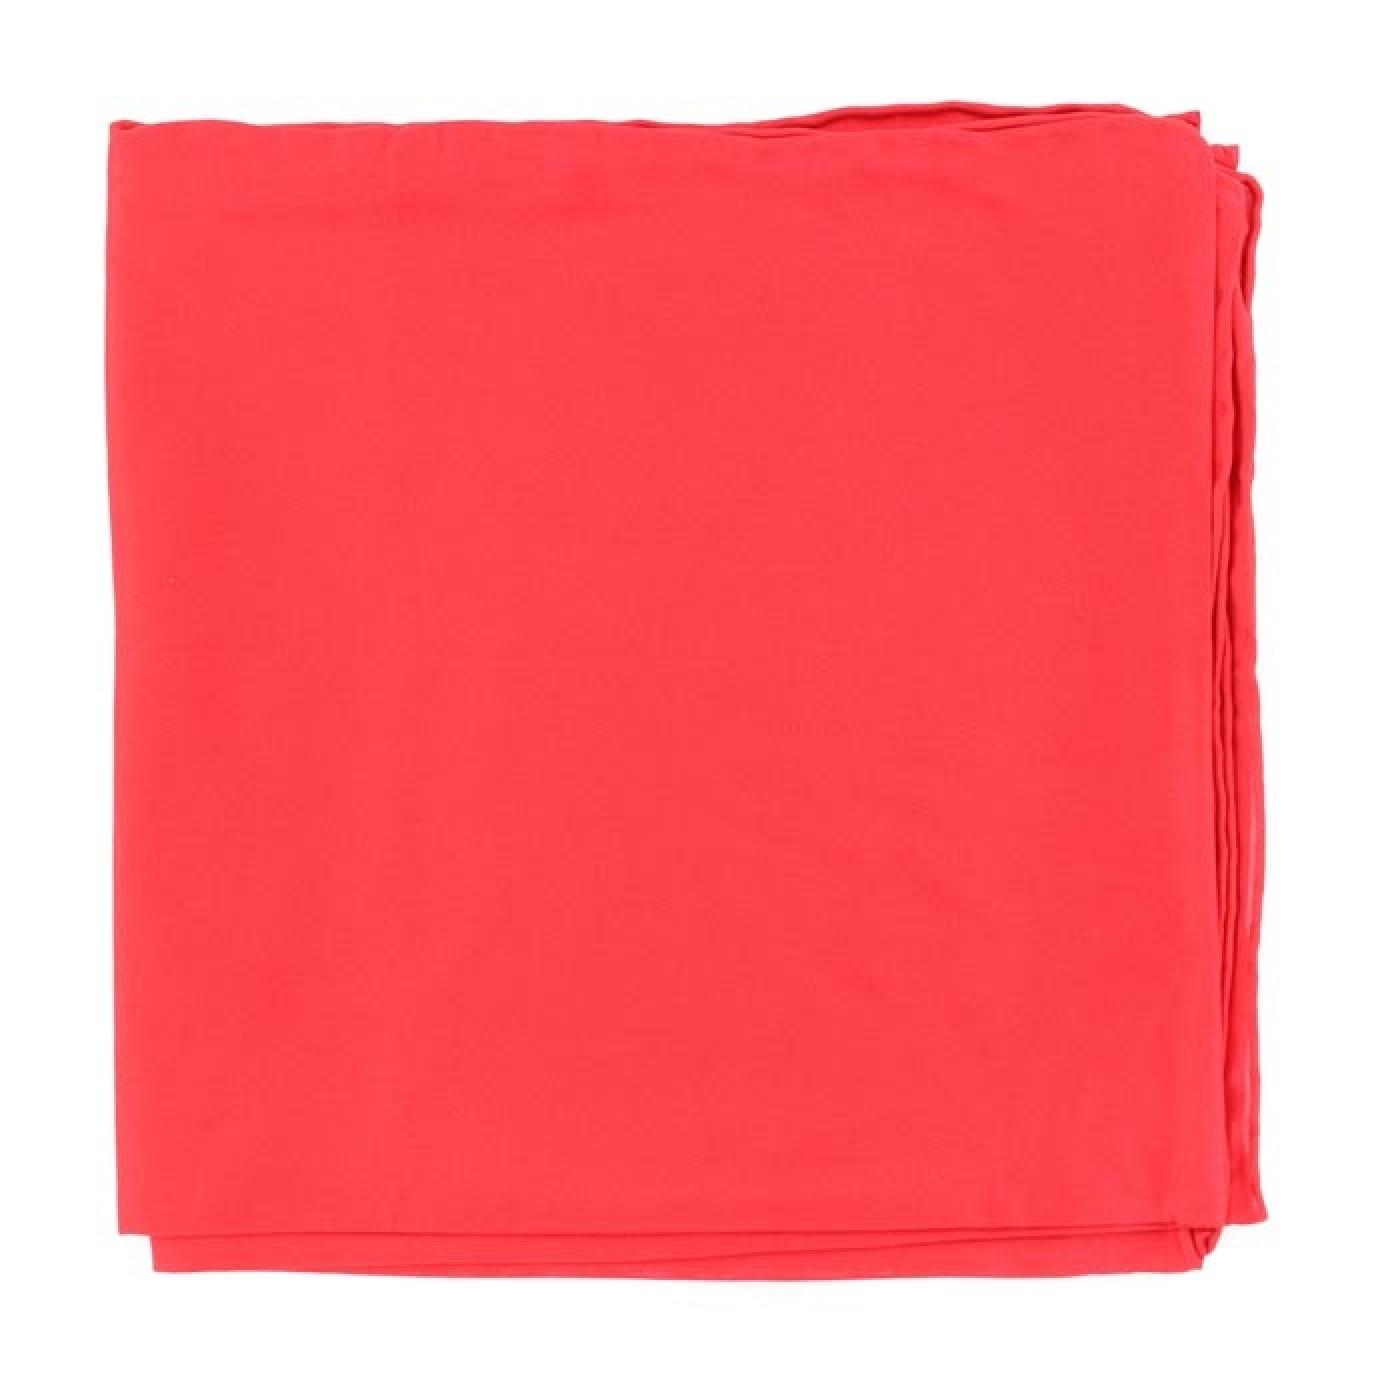 M&F Western Products Solid Wild Rags Red